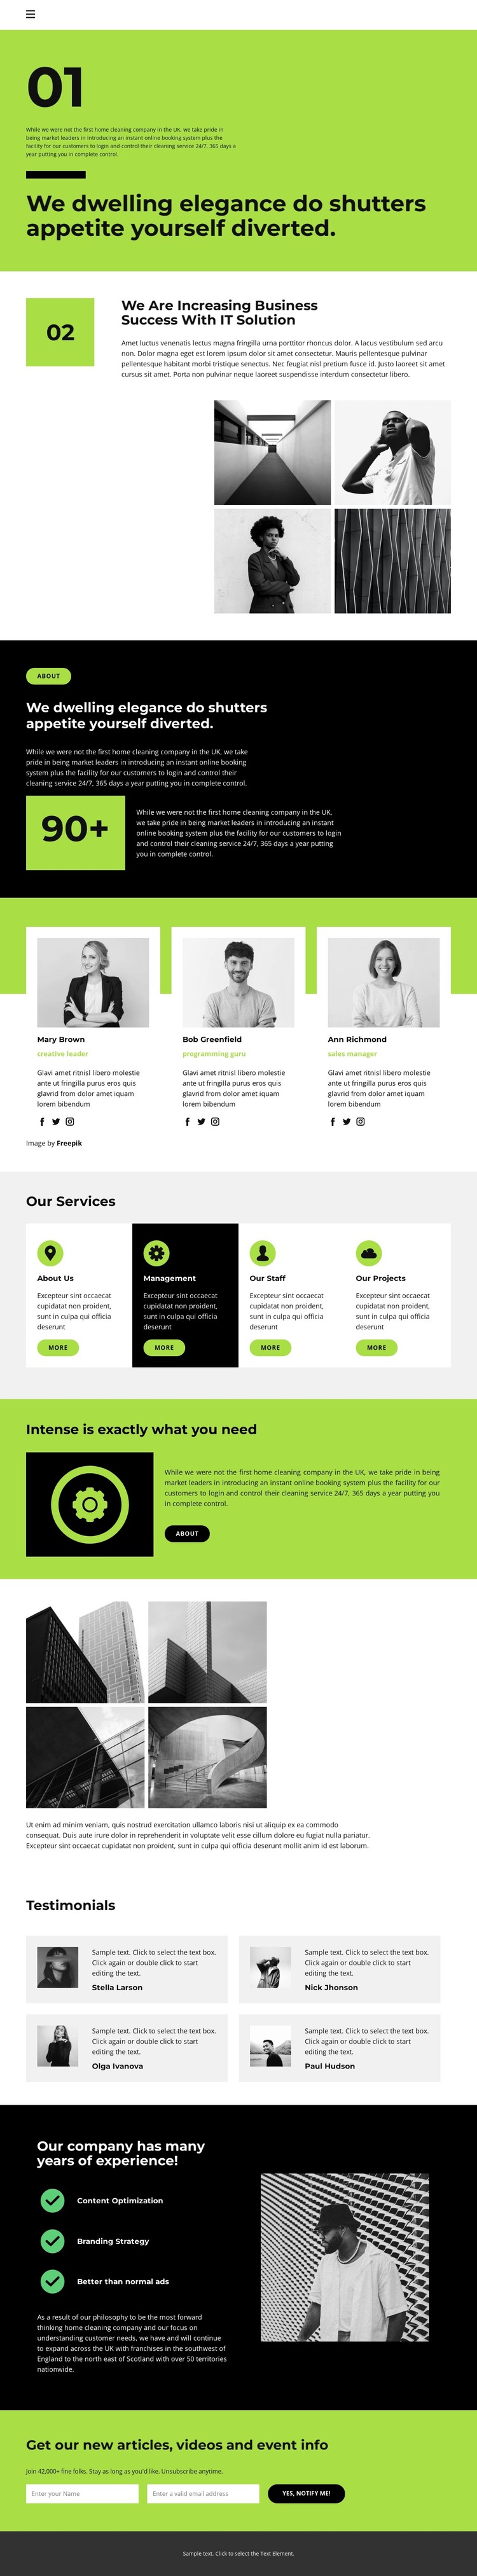 Save your finances HTML Template